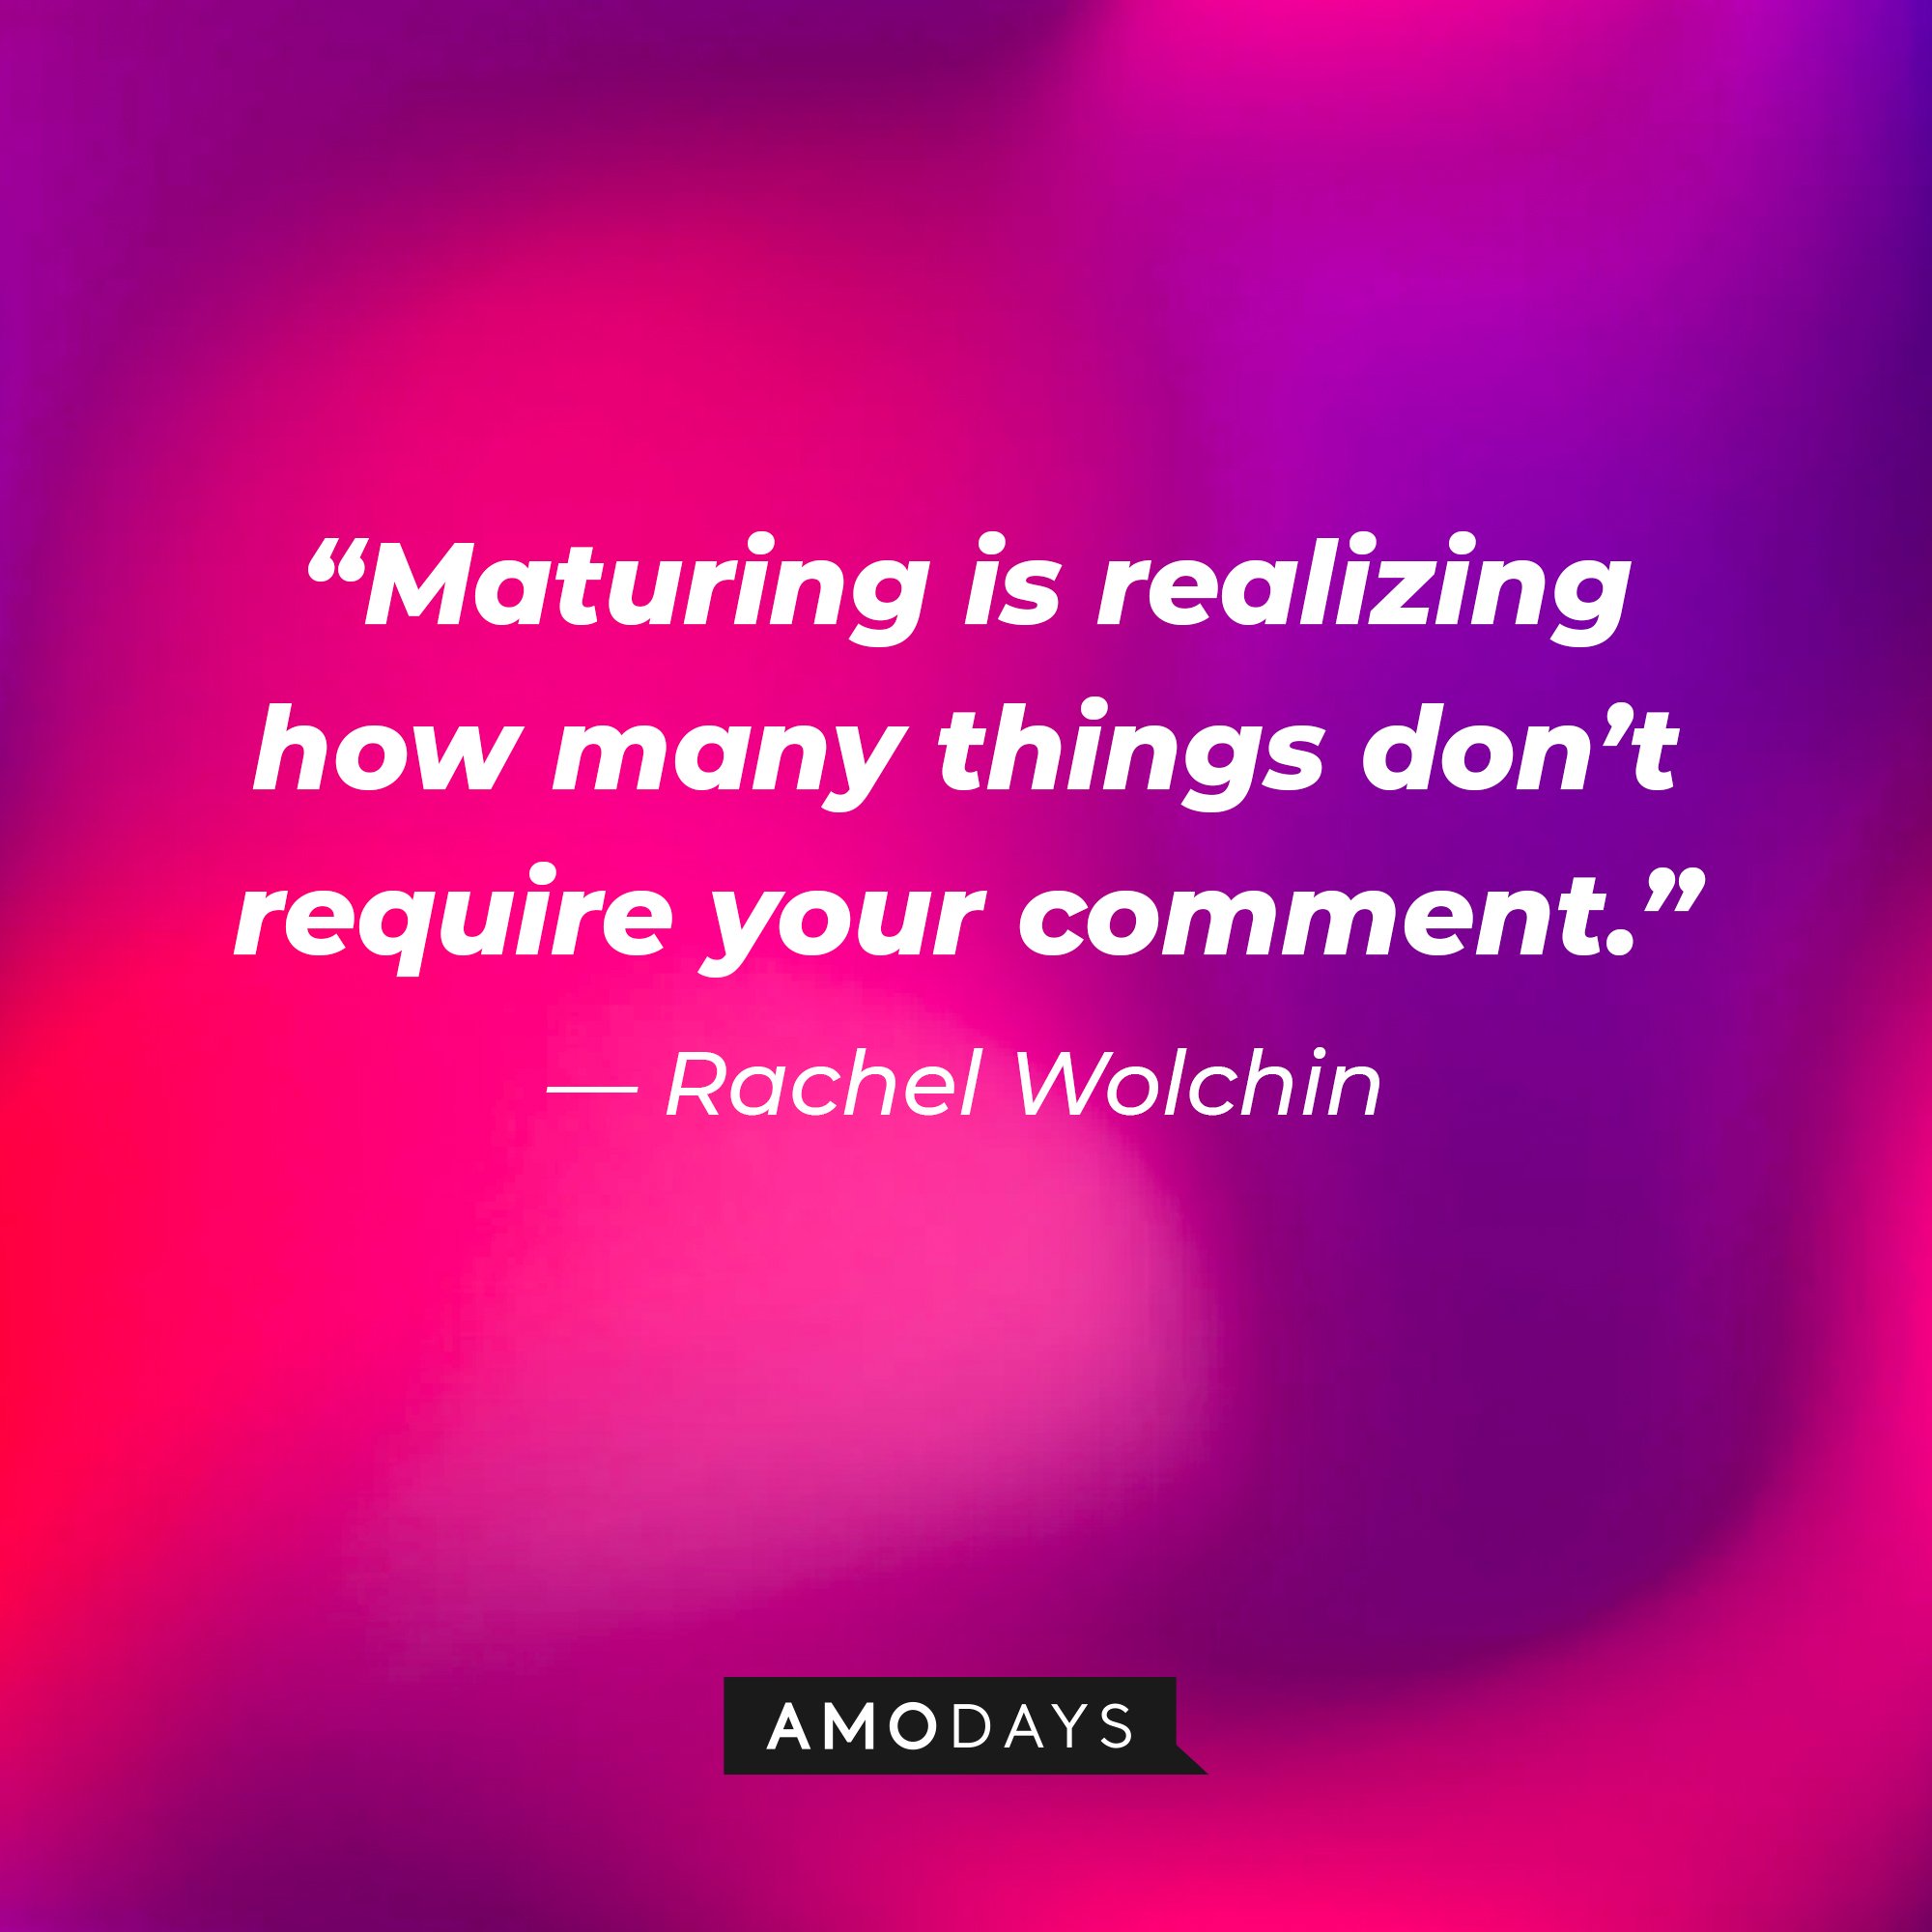  Rachel Wolchin's quote: “Maturing is realizing how many things don’t require your comment.” | Image: AmoDays